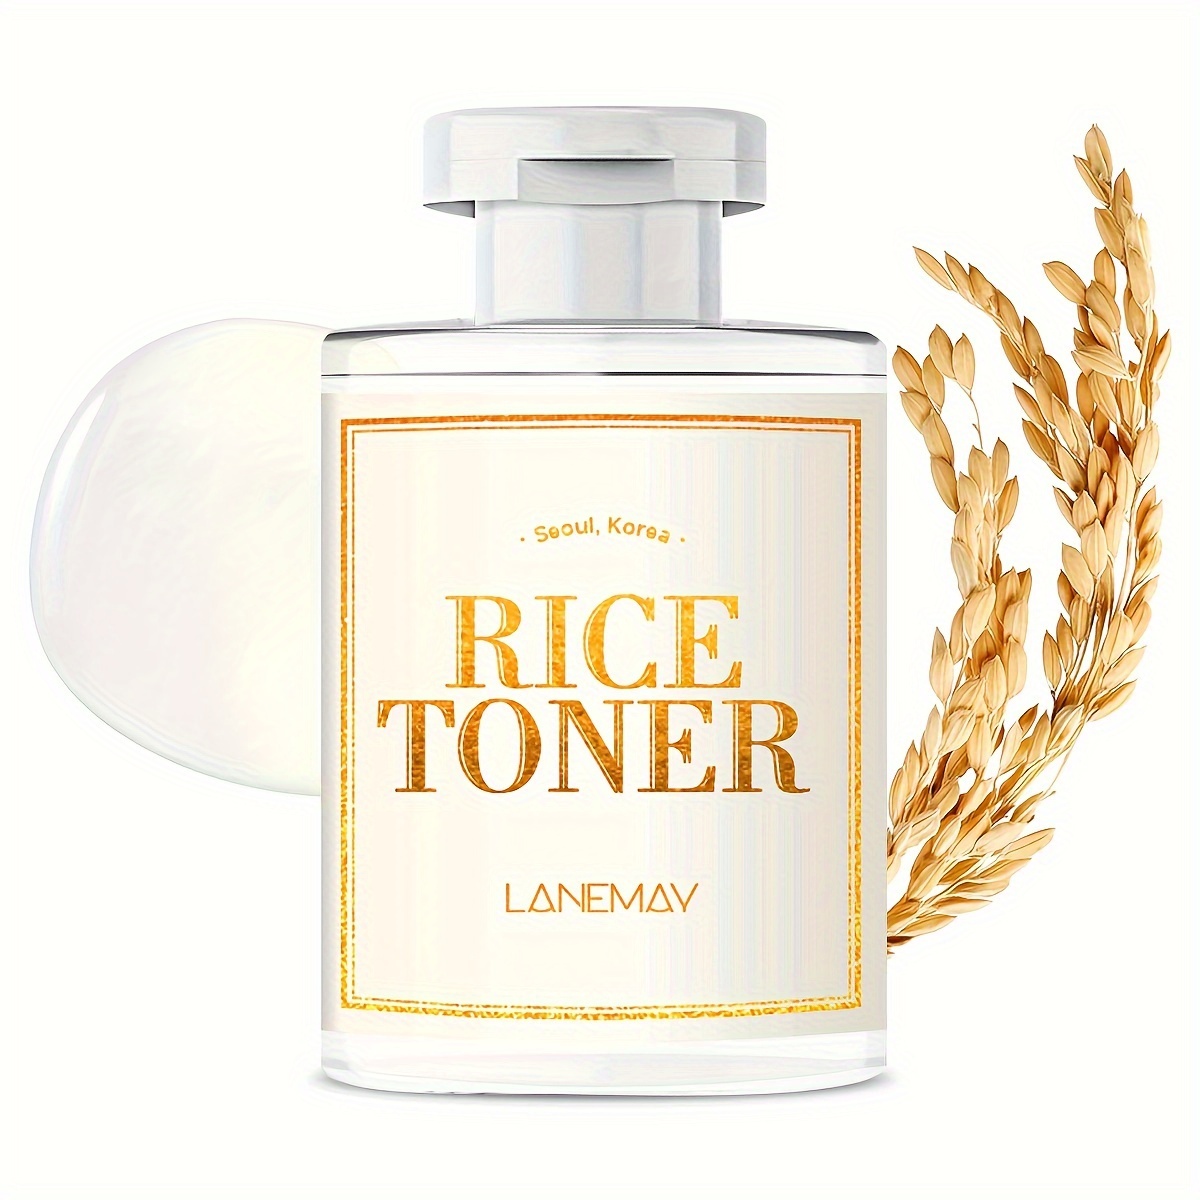 I'm From Rice Toner, 77.78% Rice Extract from Korea, Glow Essence with  Niacinamide, Hydrating for Dry Skin, Vegan, Alcohol Free, Fragrance Free,  Peta